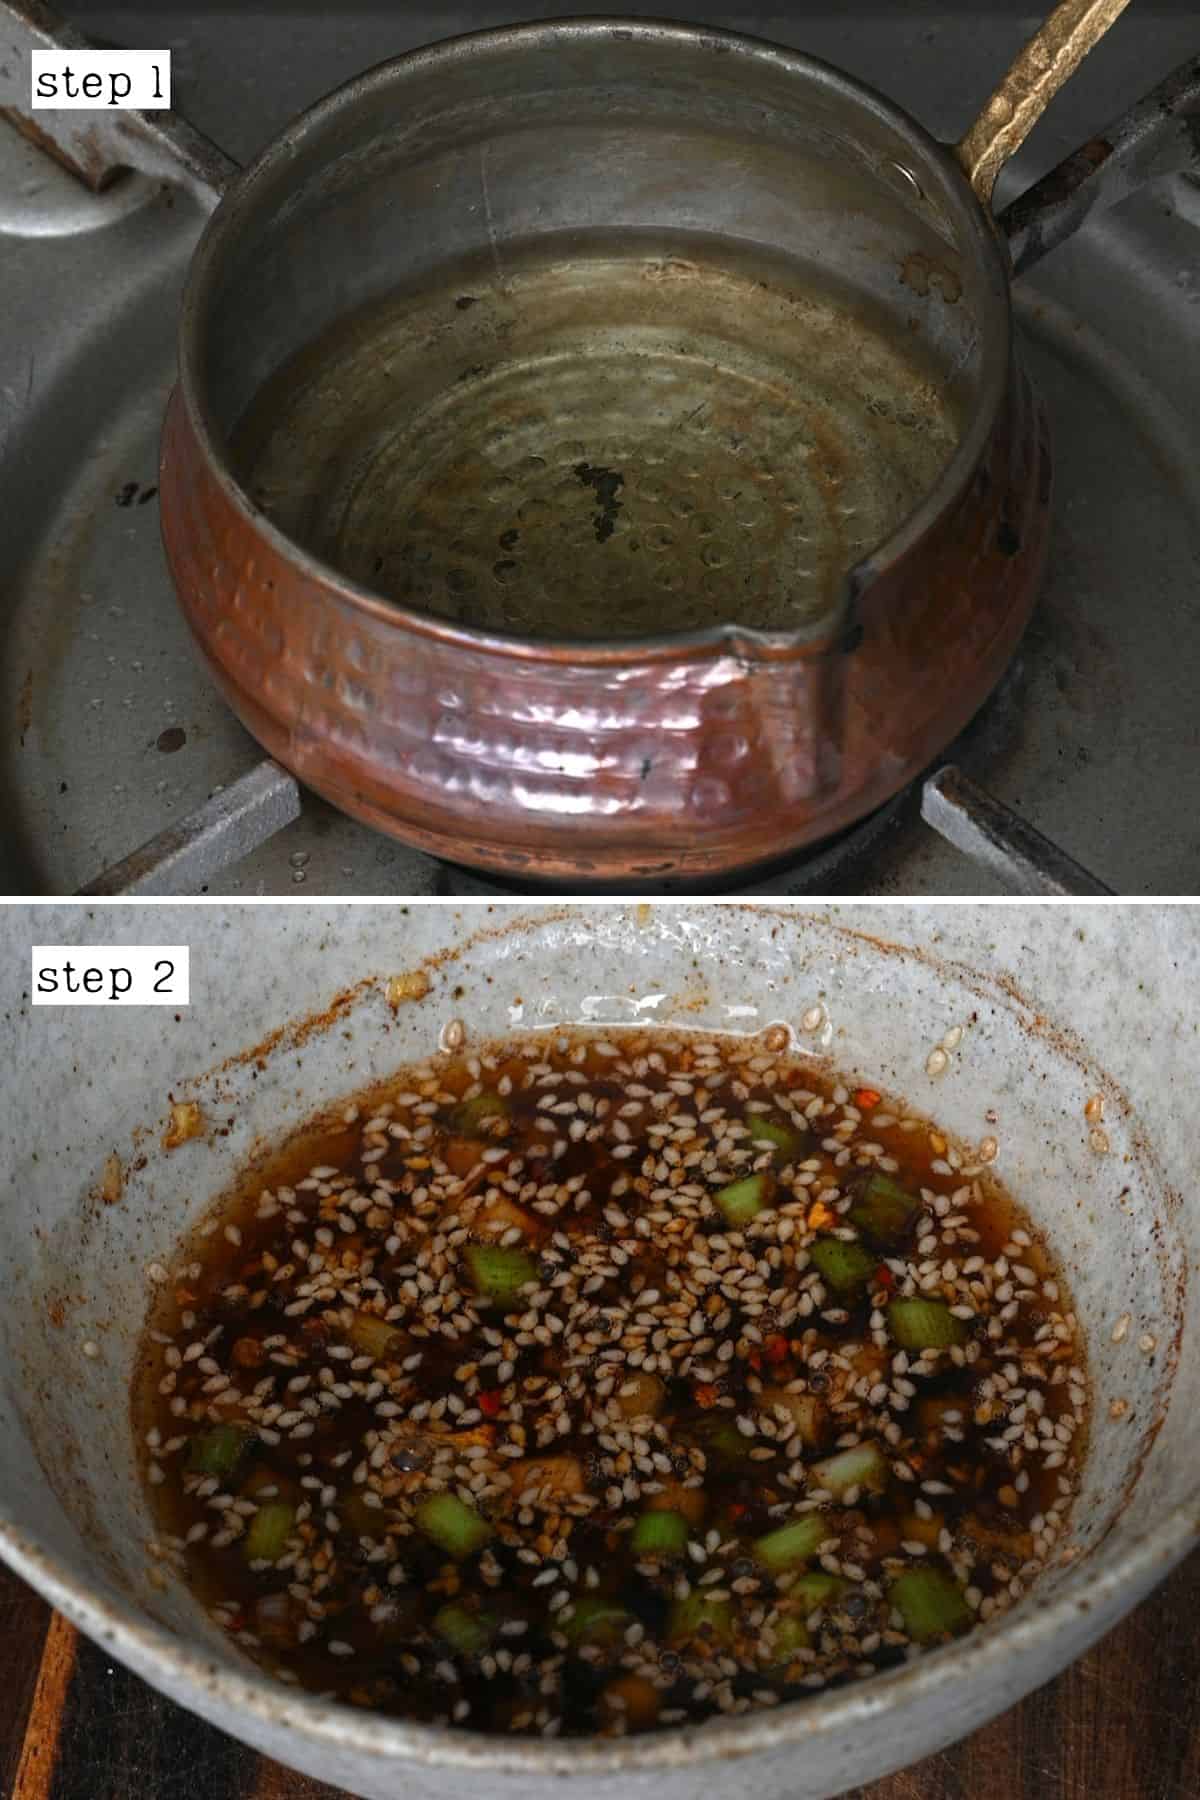 Steps for making chili oil for noodles